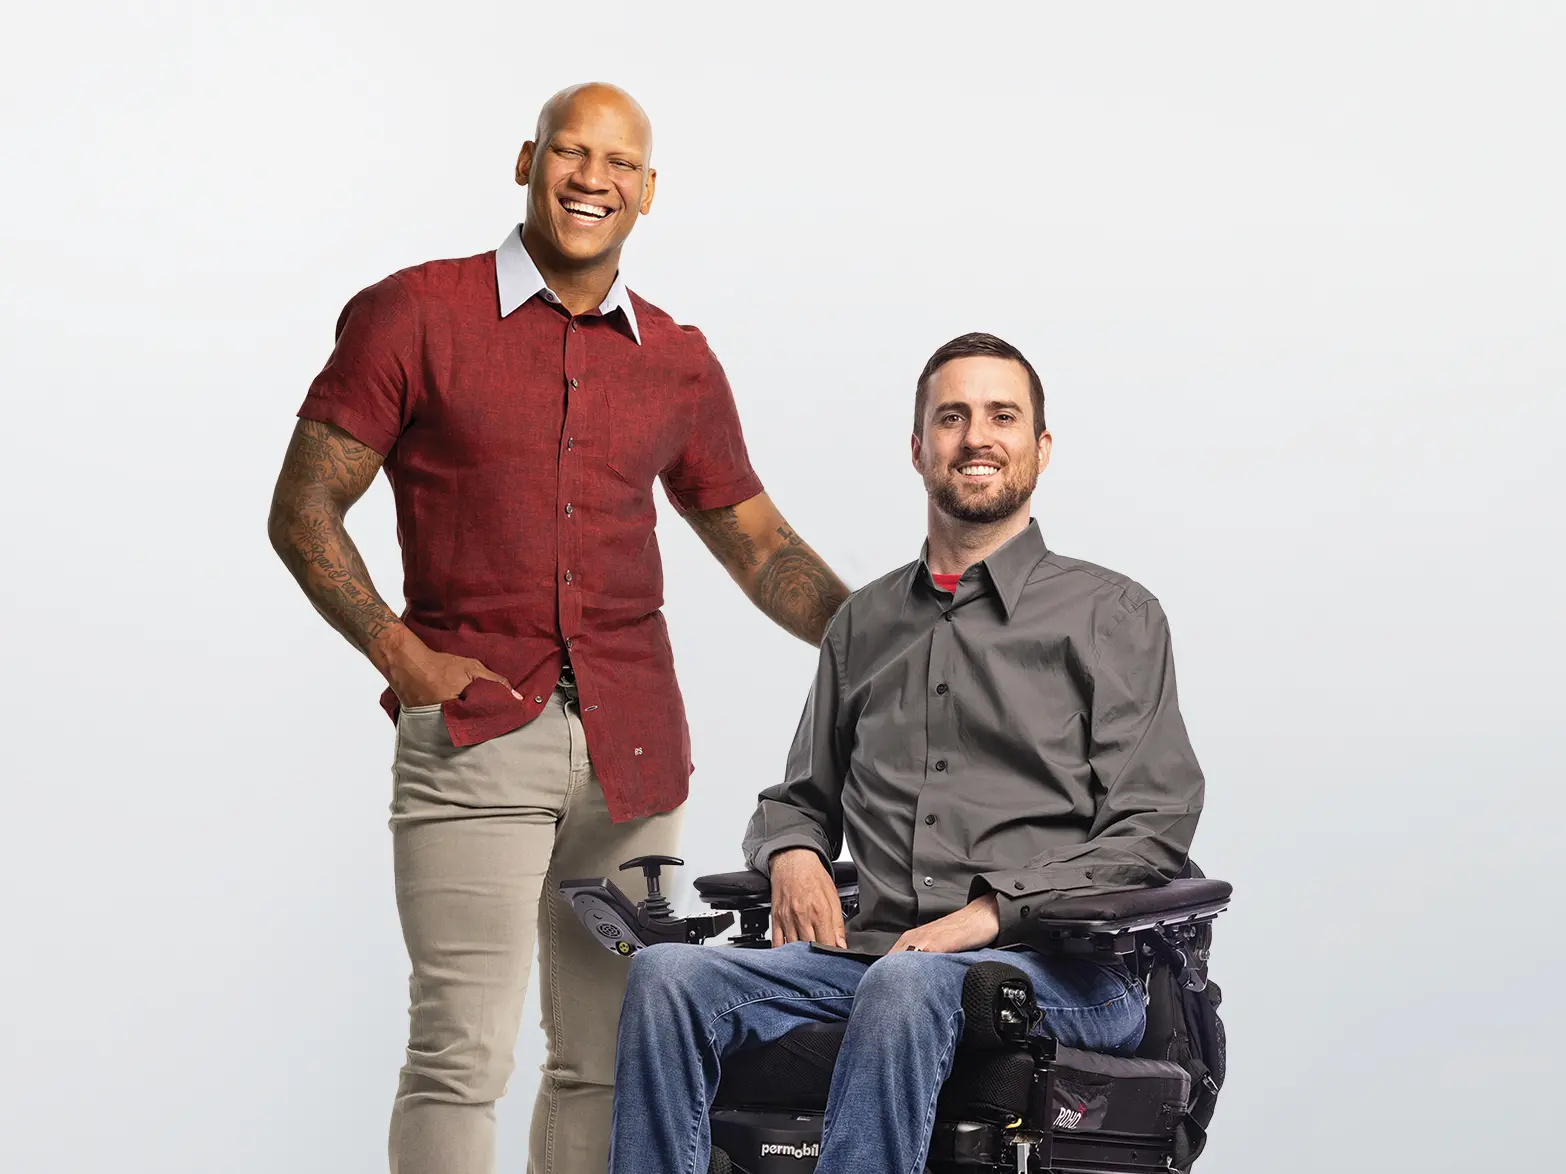 Two men are next to each other smiling. On the left is a Black man standing who is wearing a short-sleeved button-down short that shows tattoos on his arms. He has a hand on the back of the wheelchair of, on the right, a white bearded man. He wears a button-down shirt and jeans.